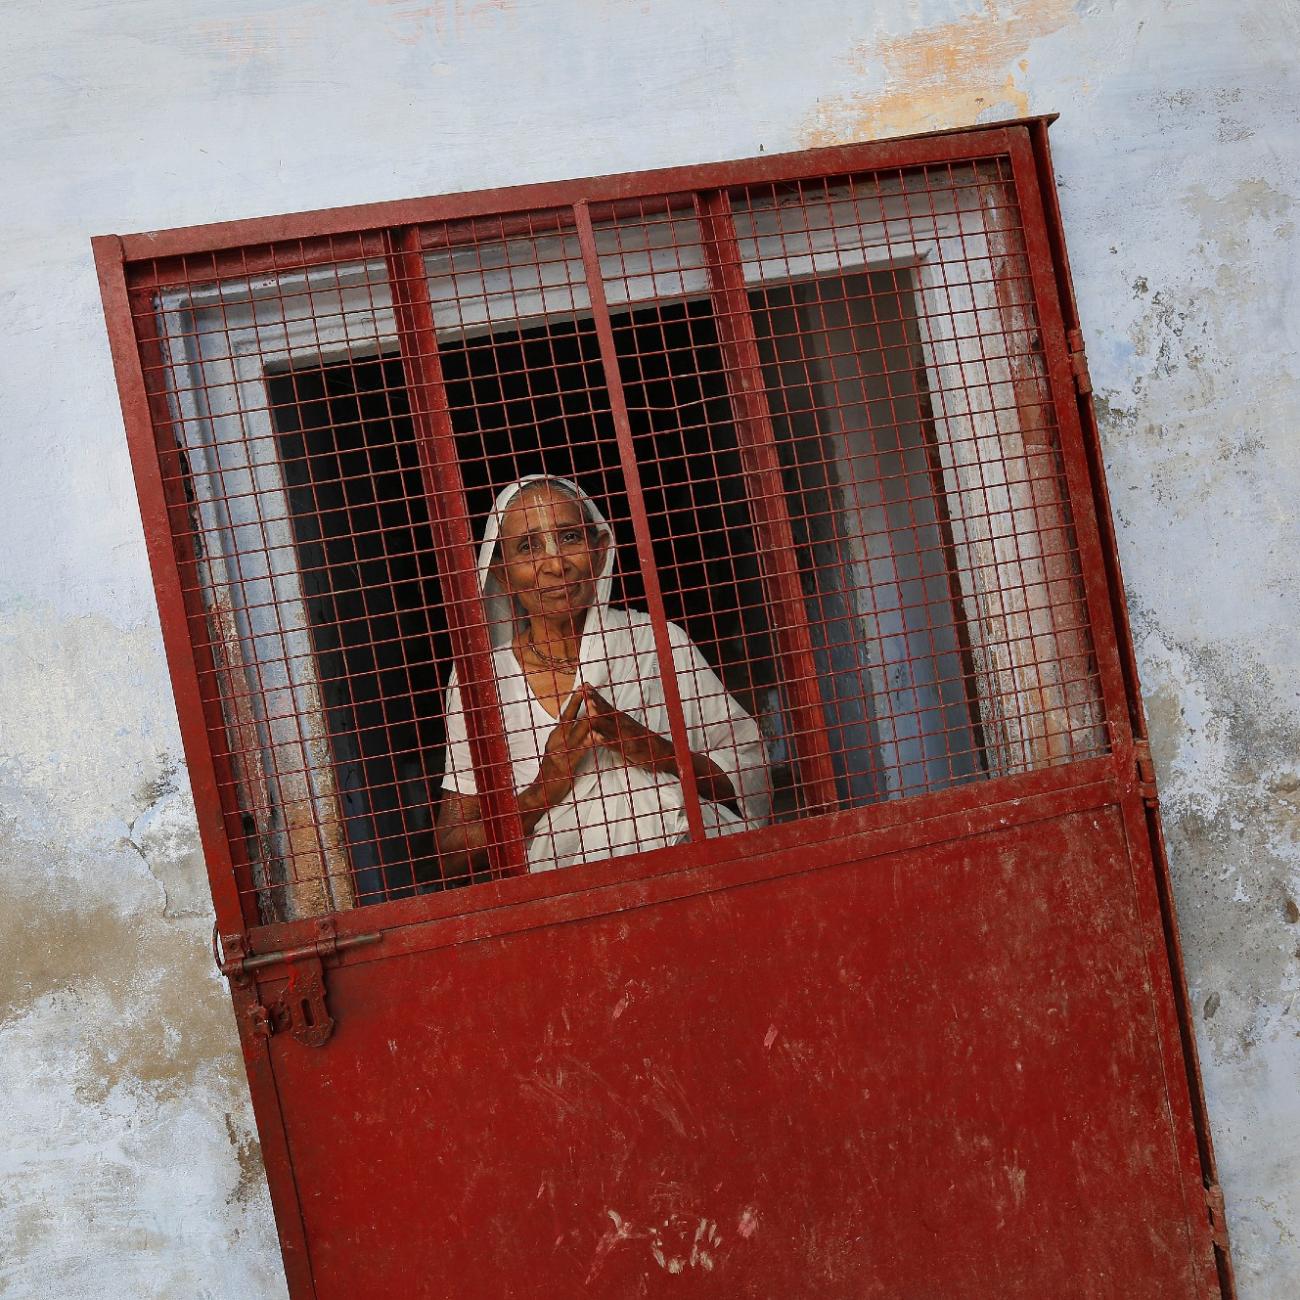 A widow poses at the entrance of a staircase at the Meera Sahavagini ashram in the pilgrimage town of Vrindavan, in Uttar Pradesh, India, on March 6, 2013.